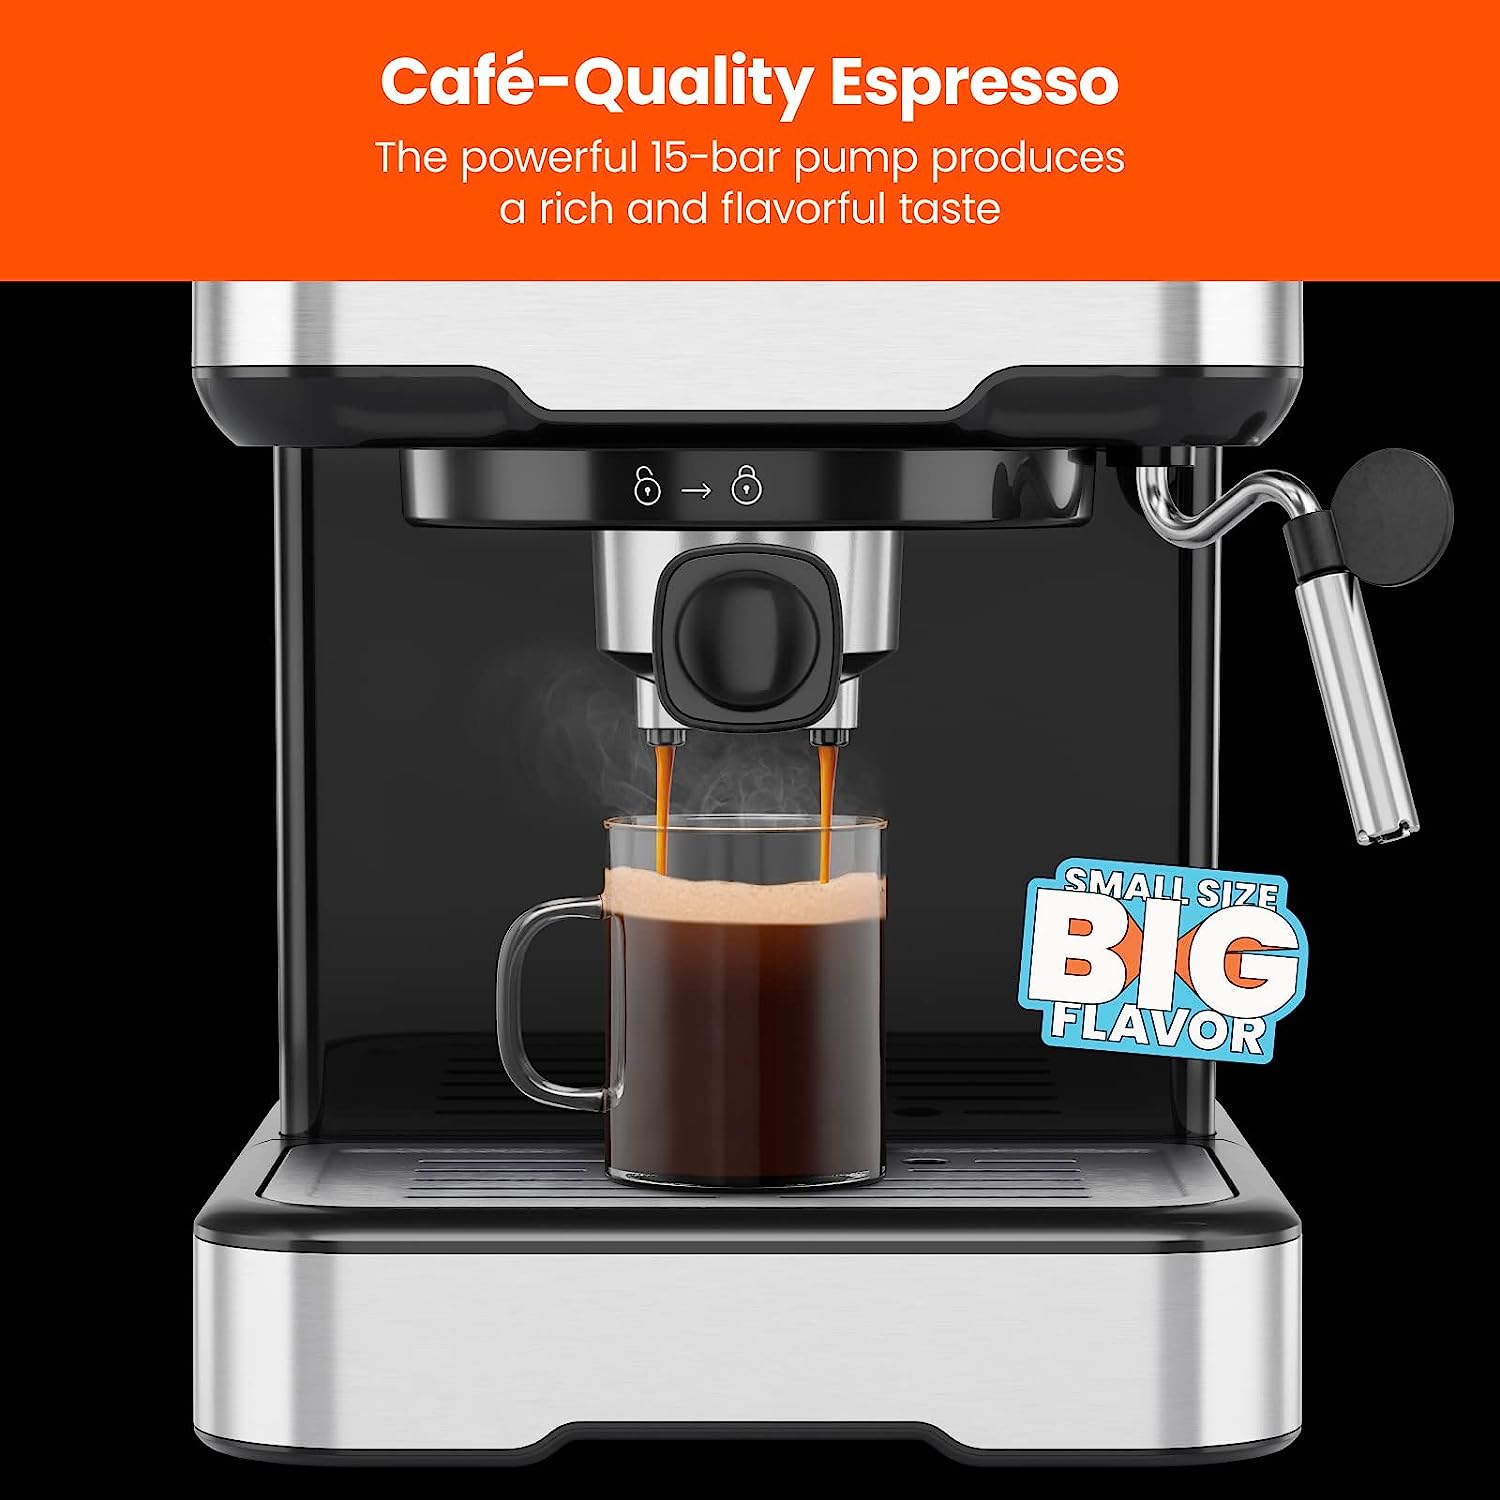 https://bigbigmart.com/wp-content/uploads/2023/07/Chefman-6-in-1-Espresso-Machine-with-Steamer-One-Touch-Single-or-Double-Shot-Espresso-Maker-Coffee-Maker-Cappuccino-Machine-Latte-Maker-Built-In-Milk-Frother-Coffee-Machine-Stainless-Steel4.jpg